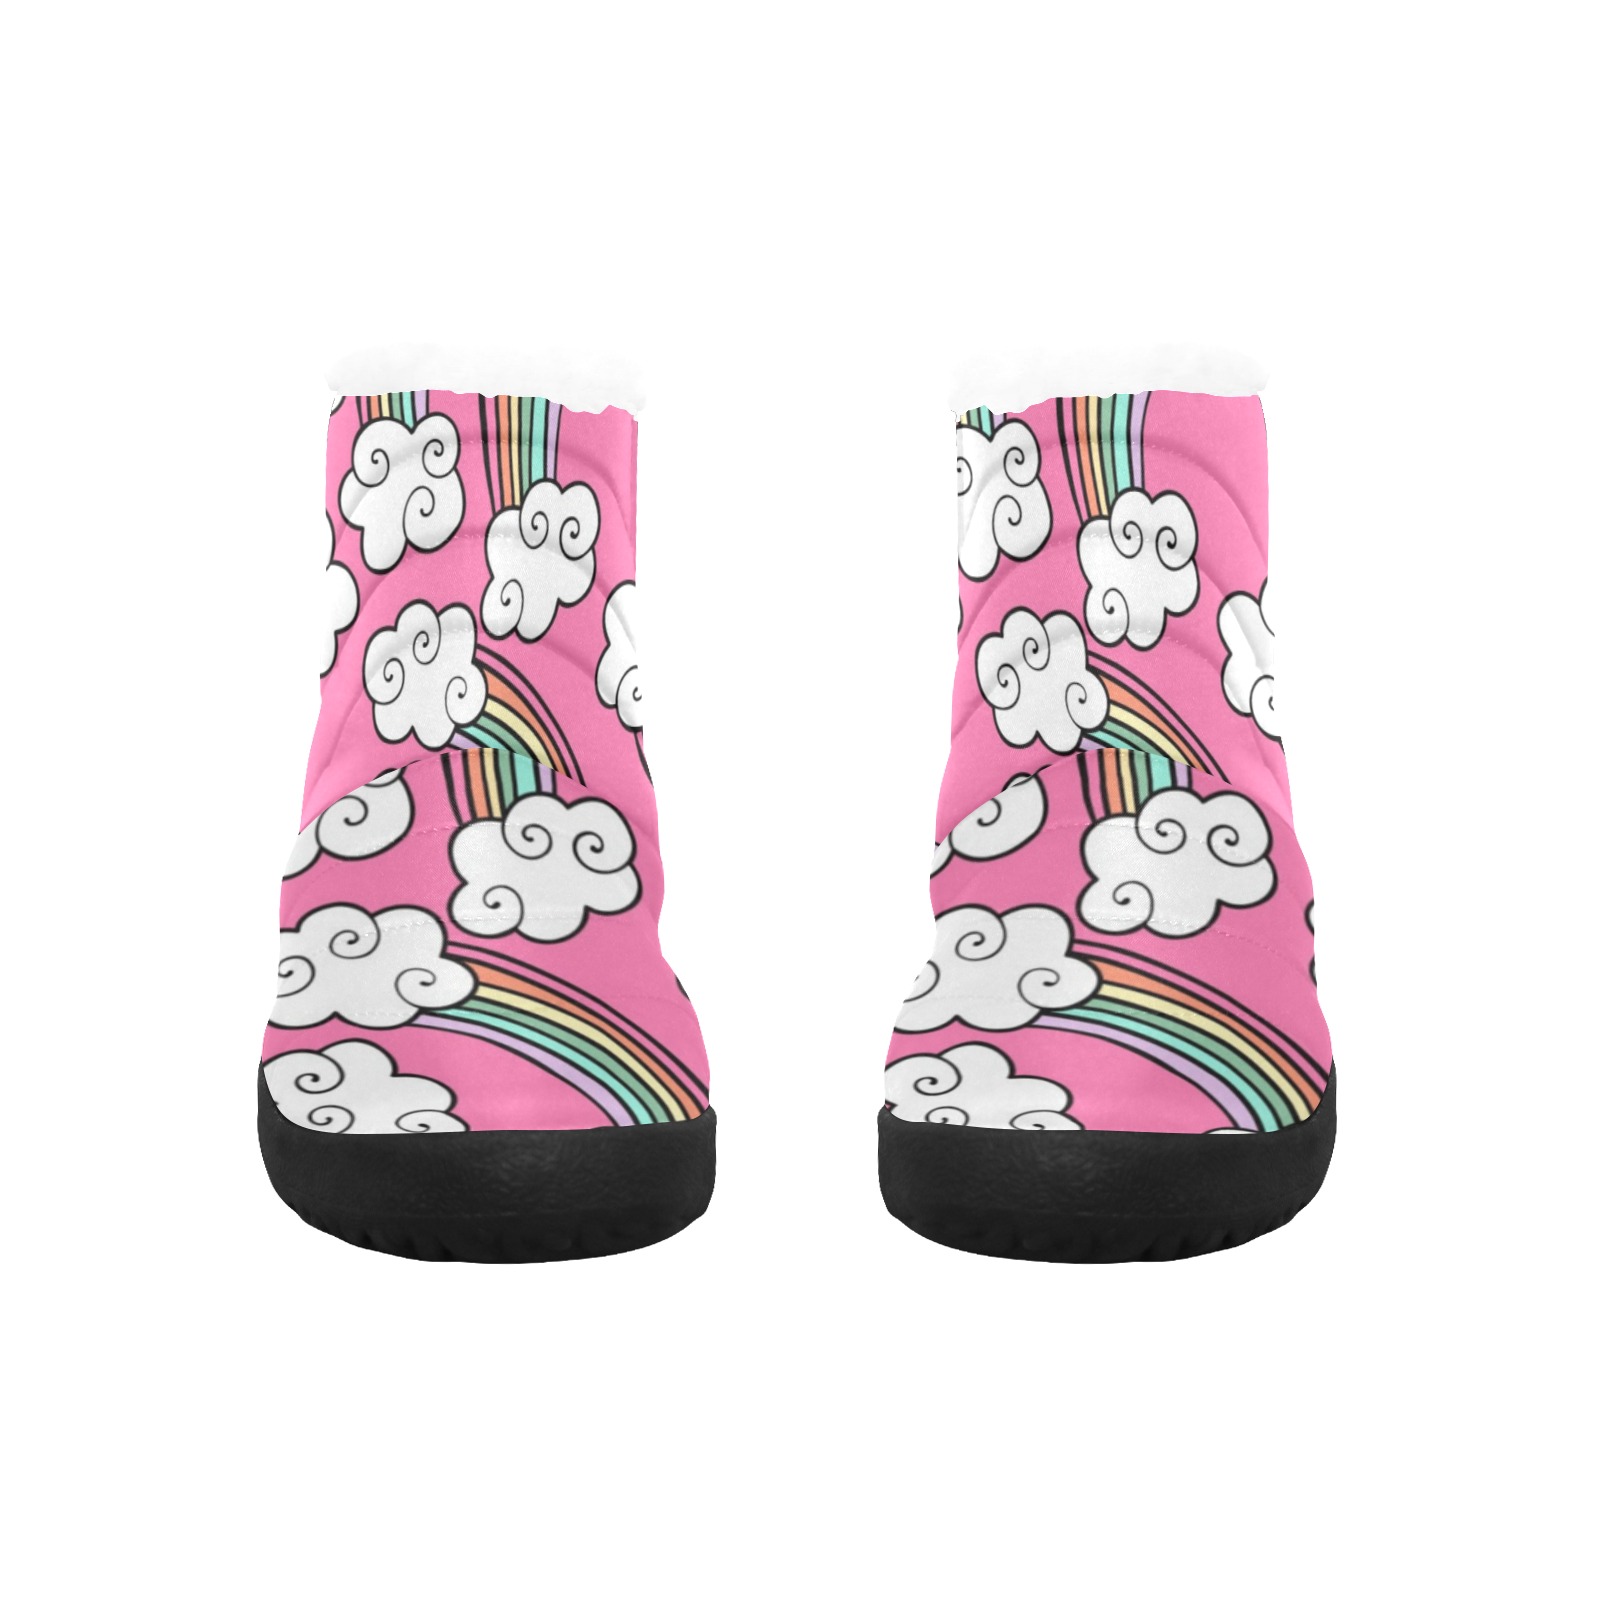 Rainbow Pink Clouds Men's Cotton-Padded Shoes (Model 19291)